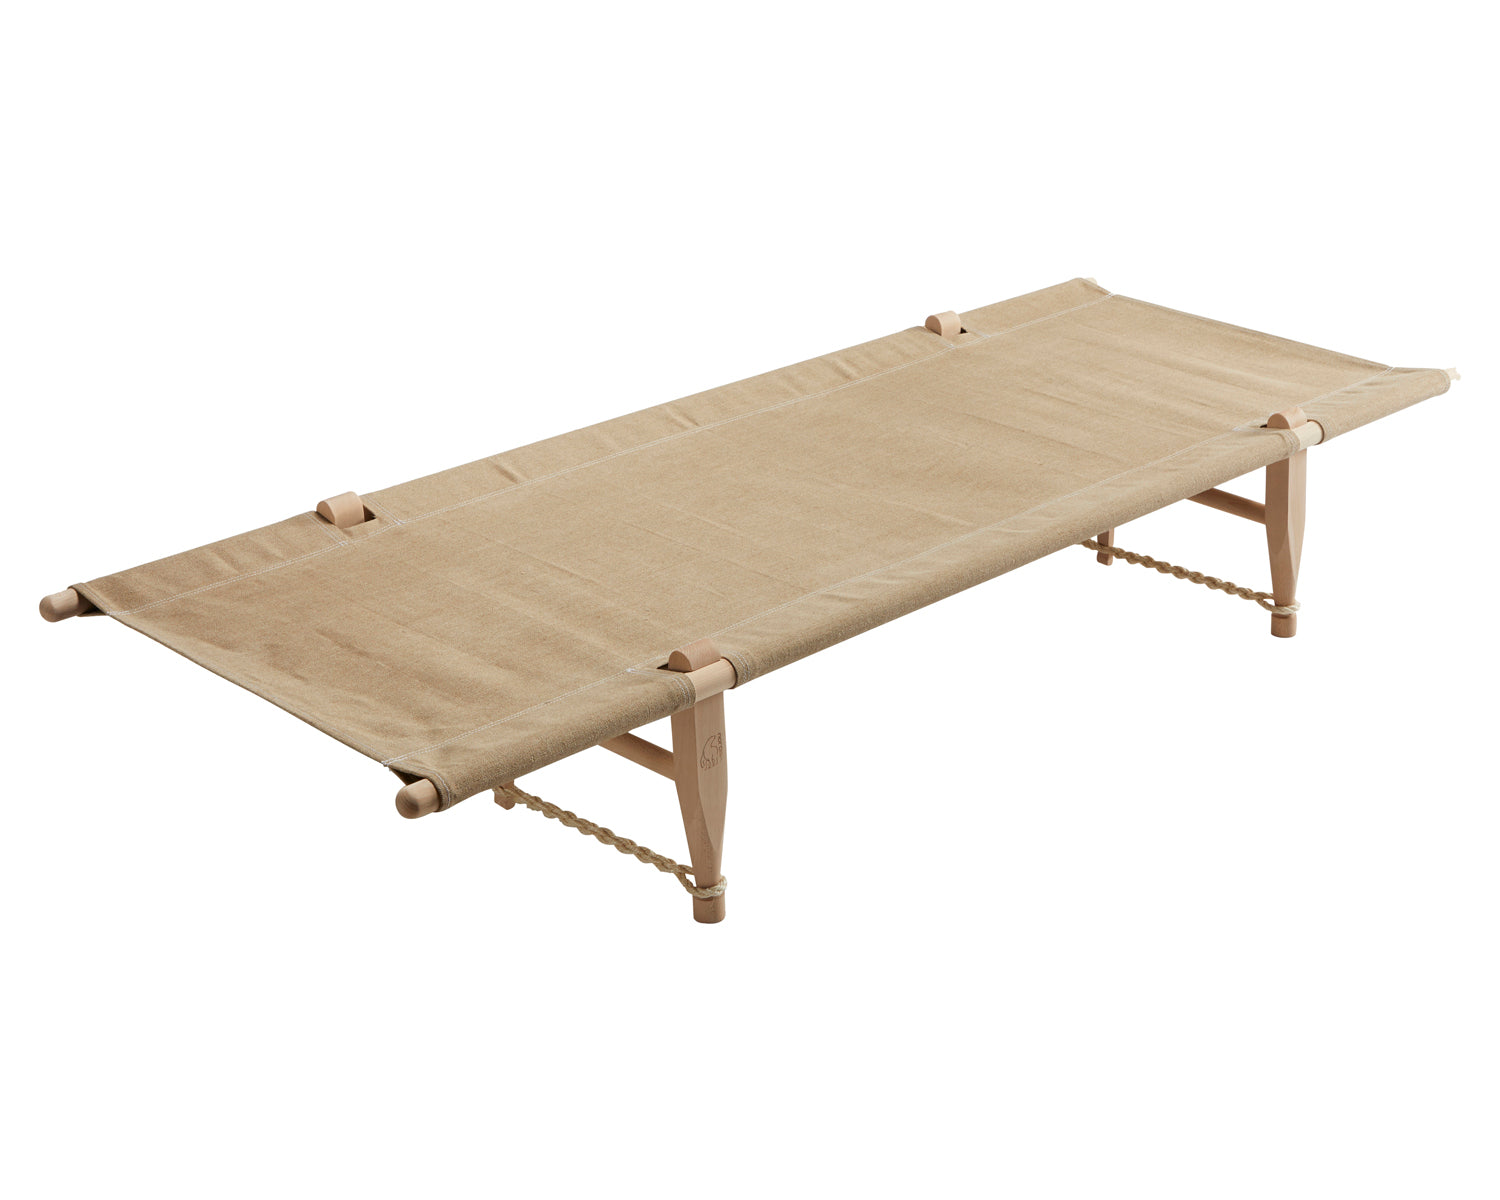 Marselis wooden bed - Neutral